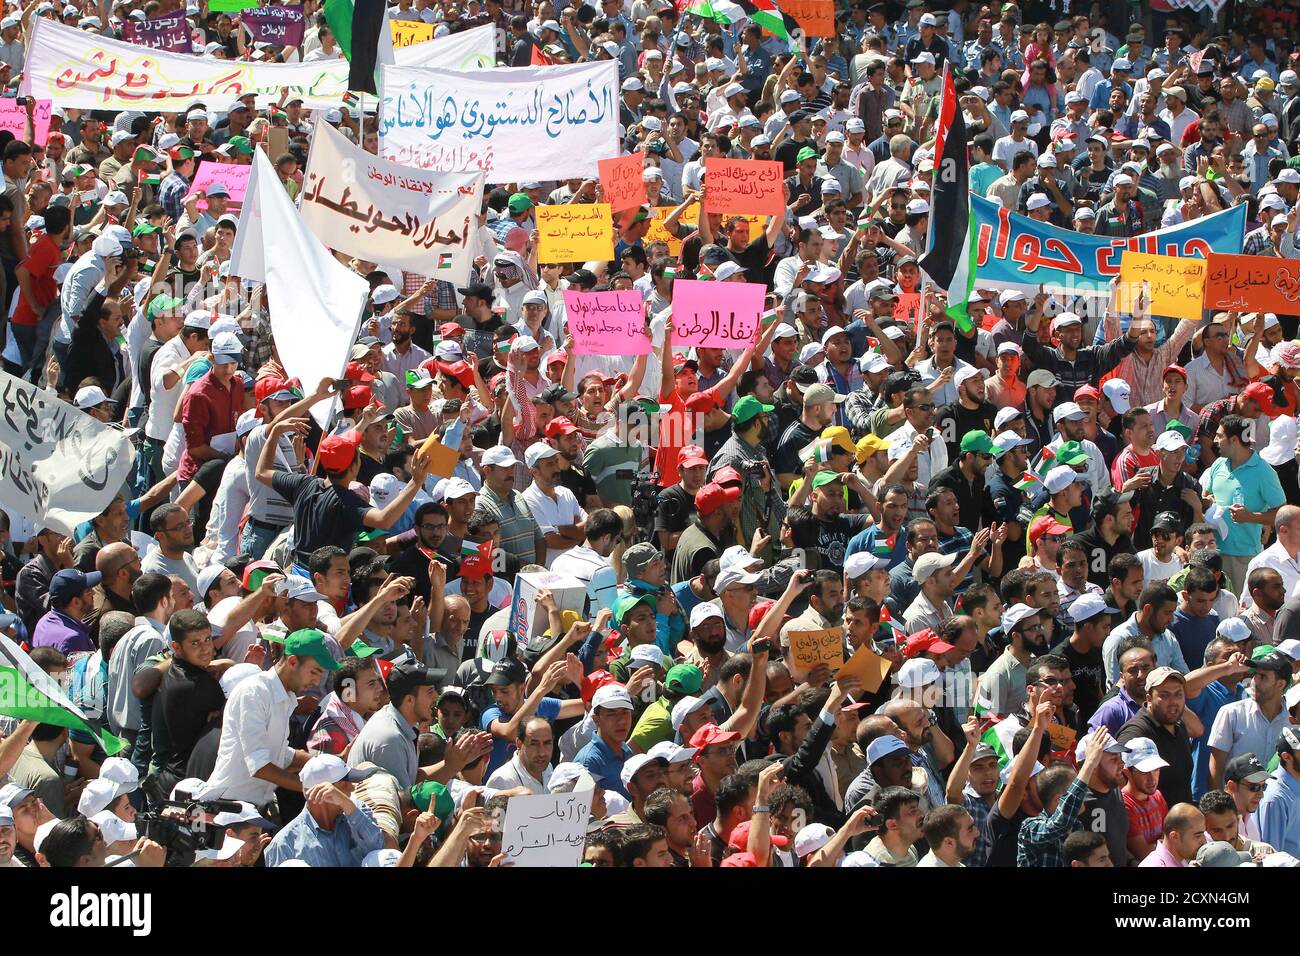 People from the Islamic Action Front and other parties hold signs as they demonstrate to demand political reforms, in Amman October 5, 2012. Thousands of Jordanian Islamist supporters marched on